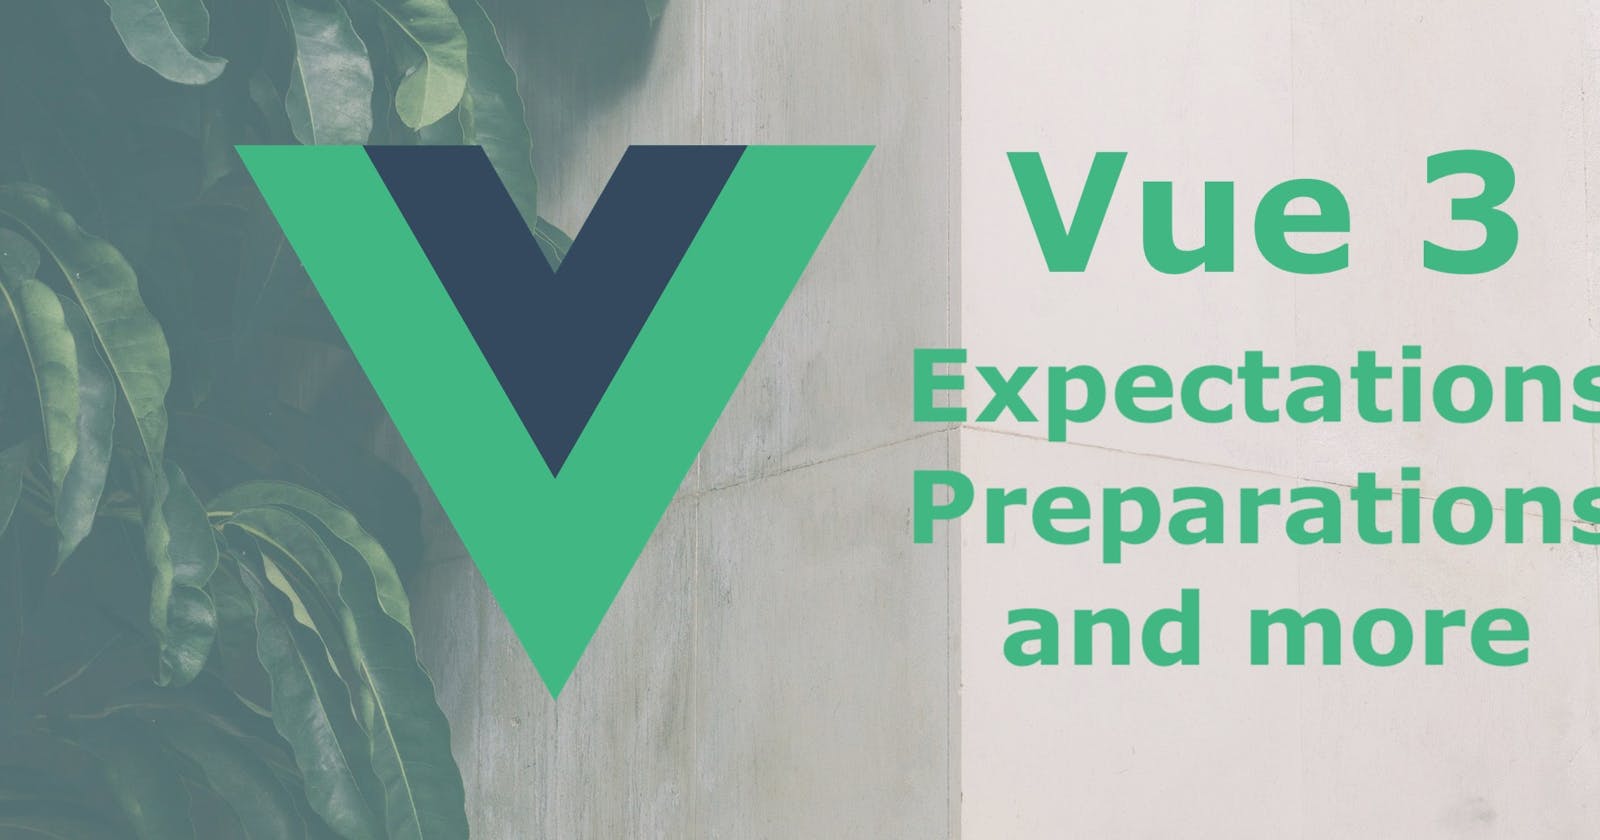 Vue 3 is coming - what to expect and how to prepare